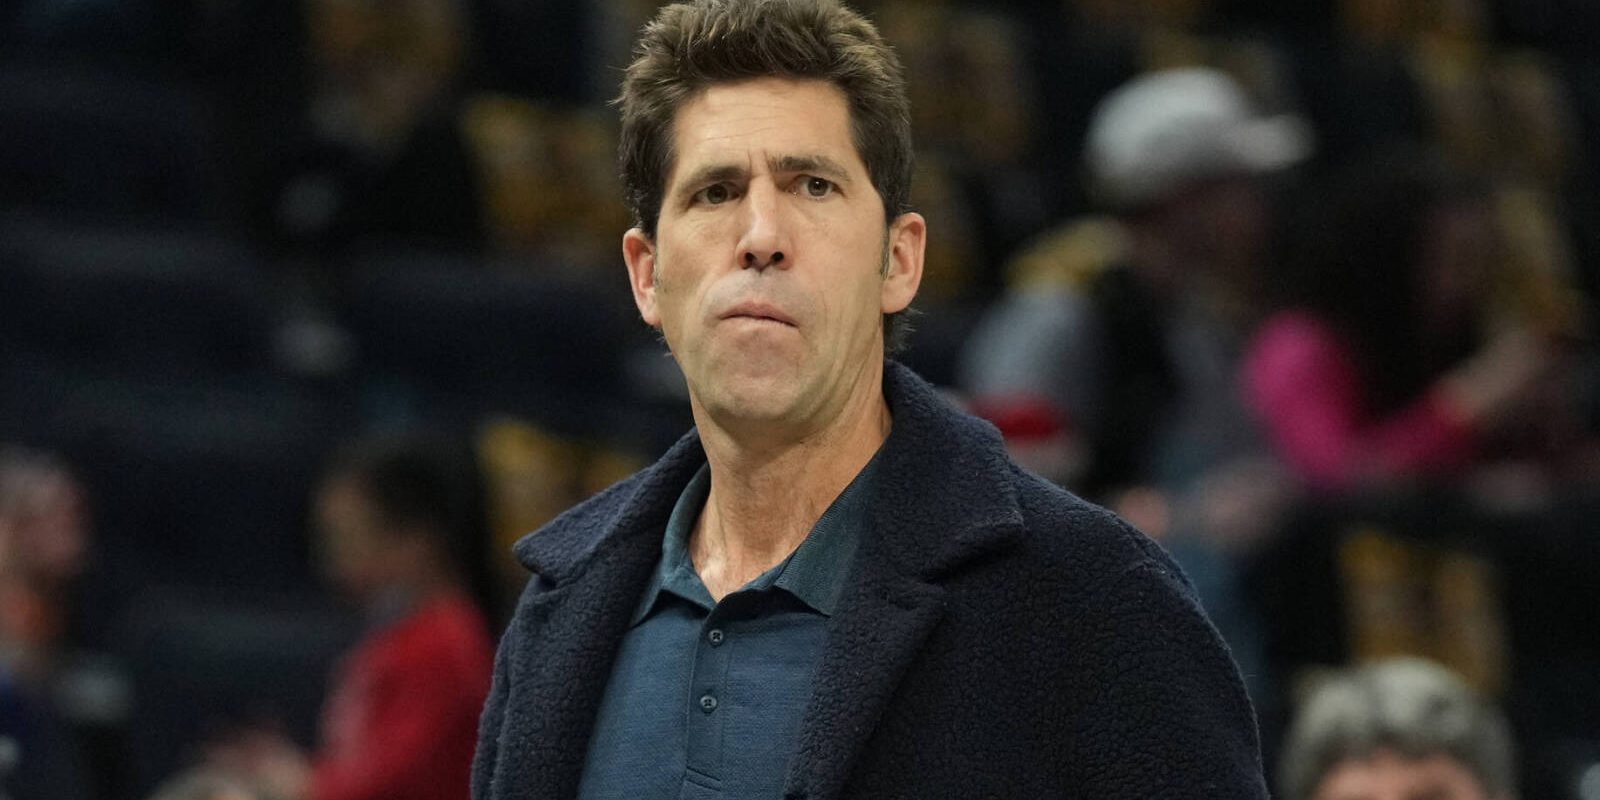 Dec 25, 2022; San Francisco, California, USA; Golden State Warriors president Bob Myers before the game against the Memphis Grizzlies at Chase Center. Mandatory Credit: Darren Yamashita-USA TODAY Sports